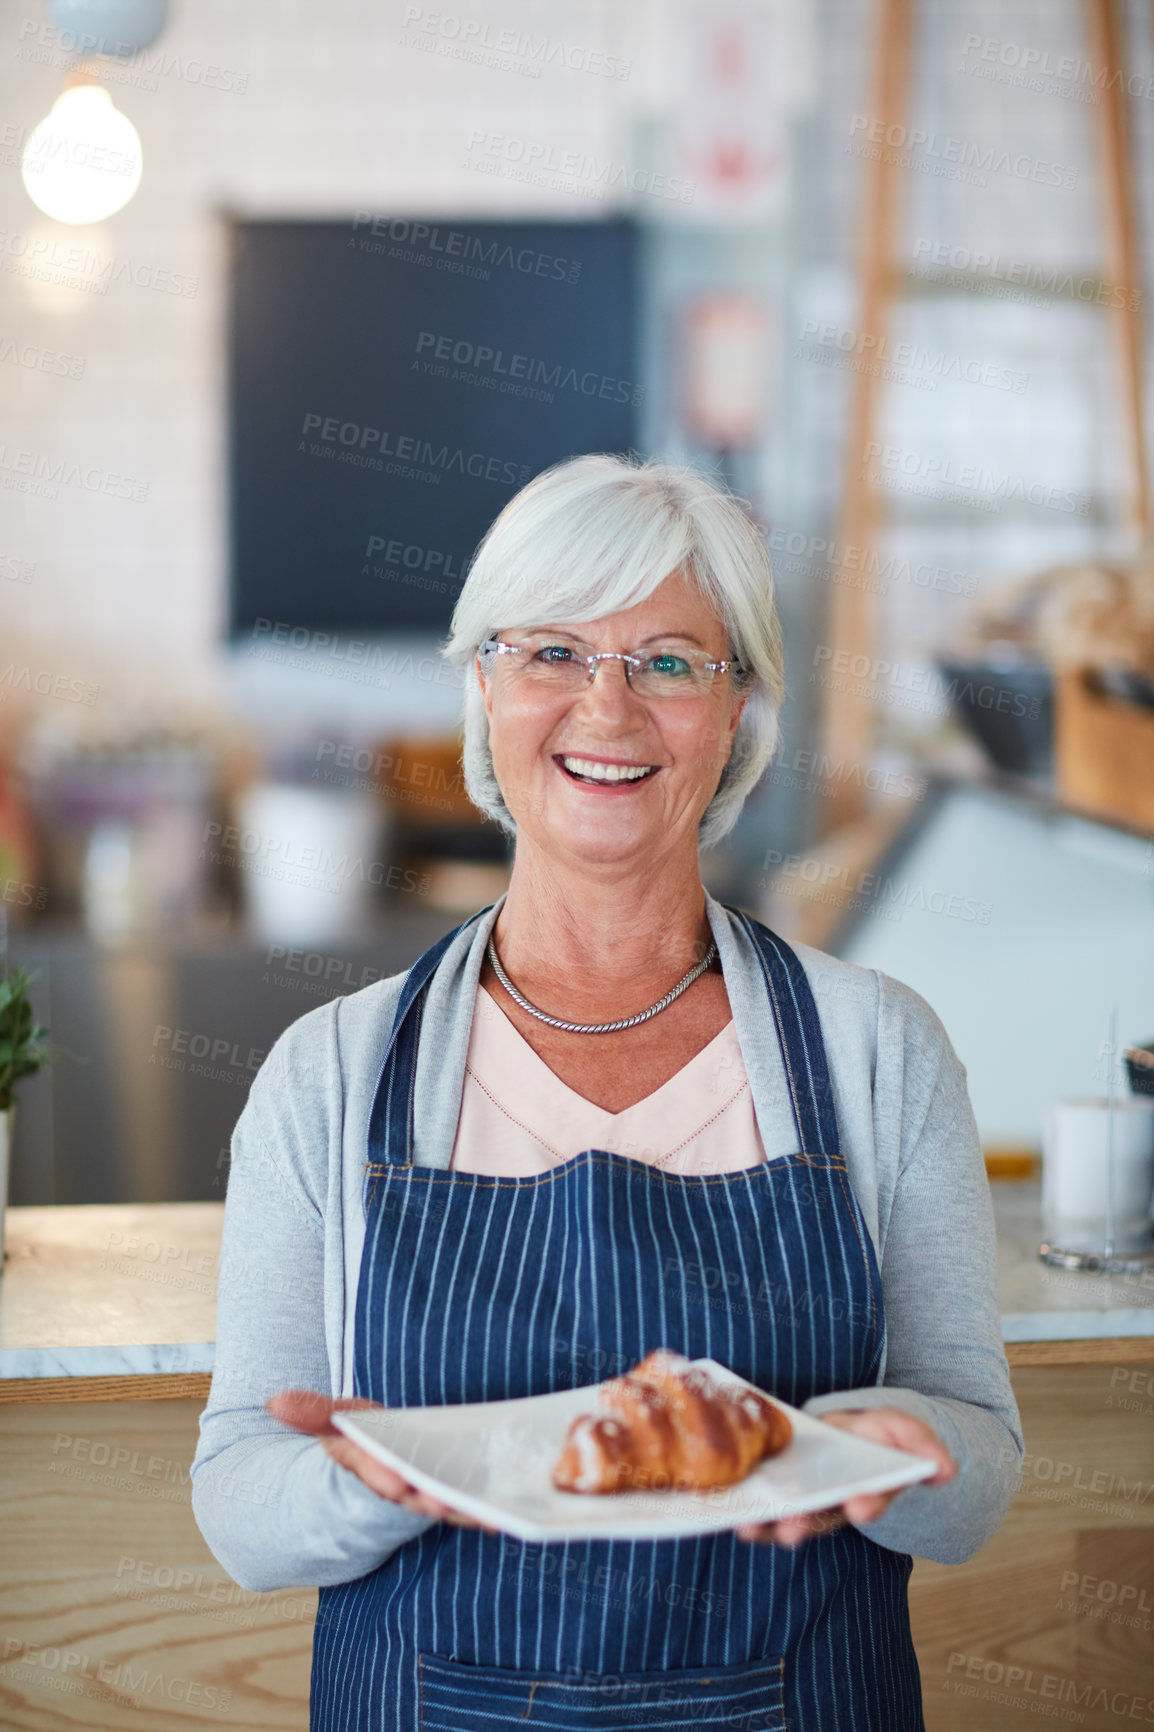 Buy stock photo Portrait of a happy senior business owner holding a plate with a pastry on it in her coffee shop